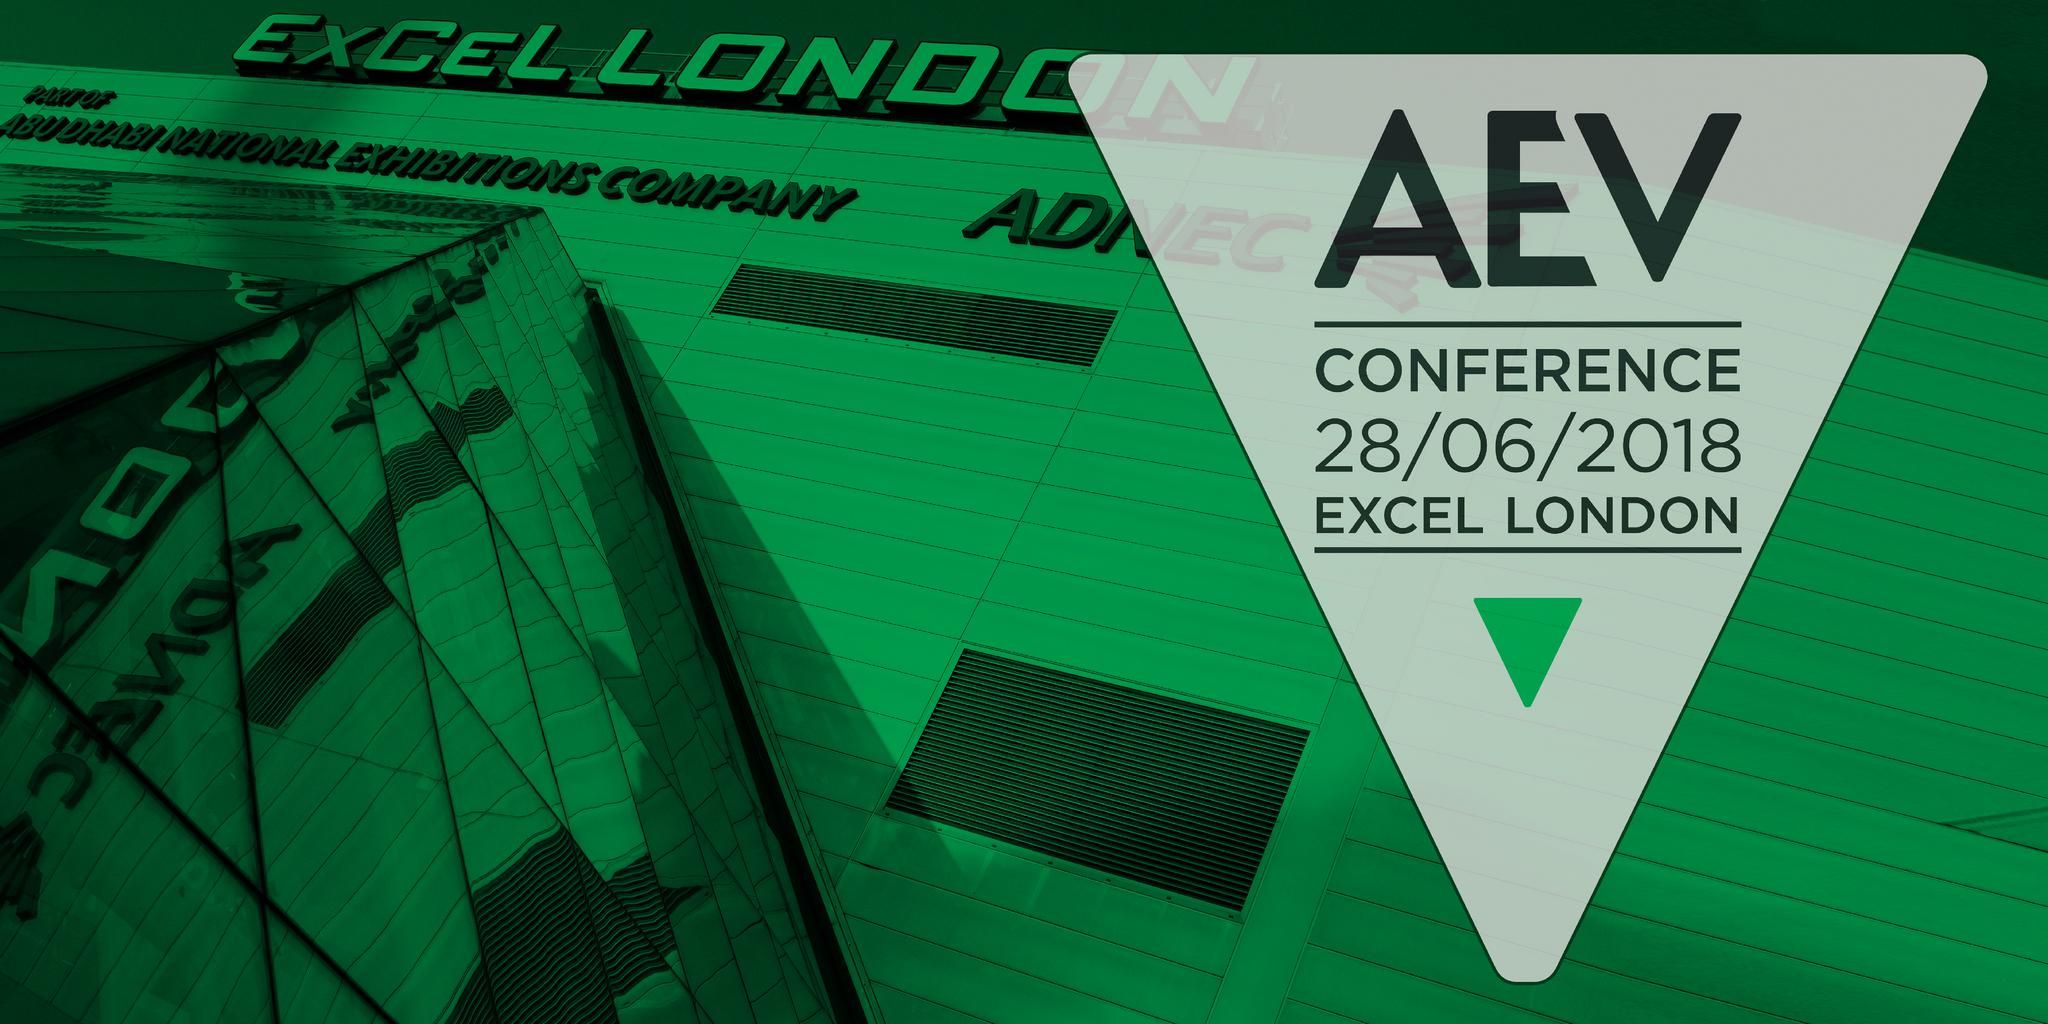 AEV announces date and venue for 2018 conference.